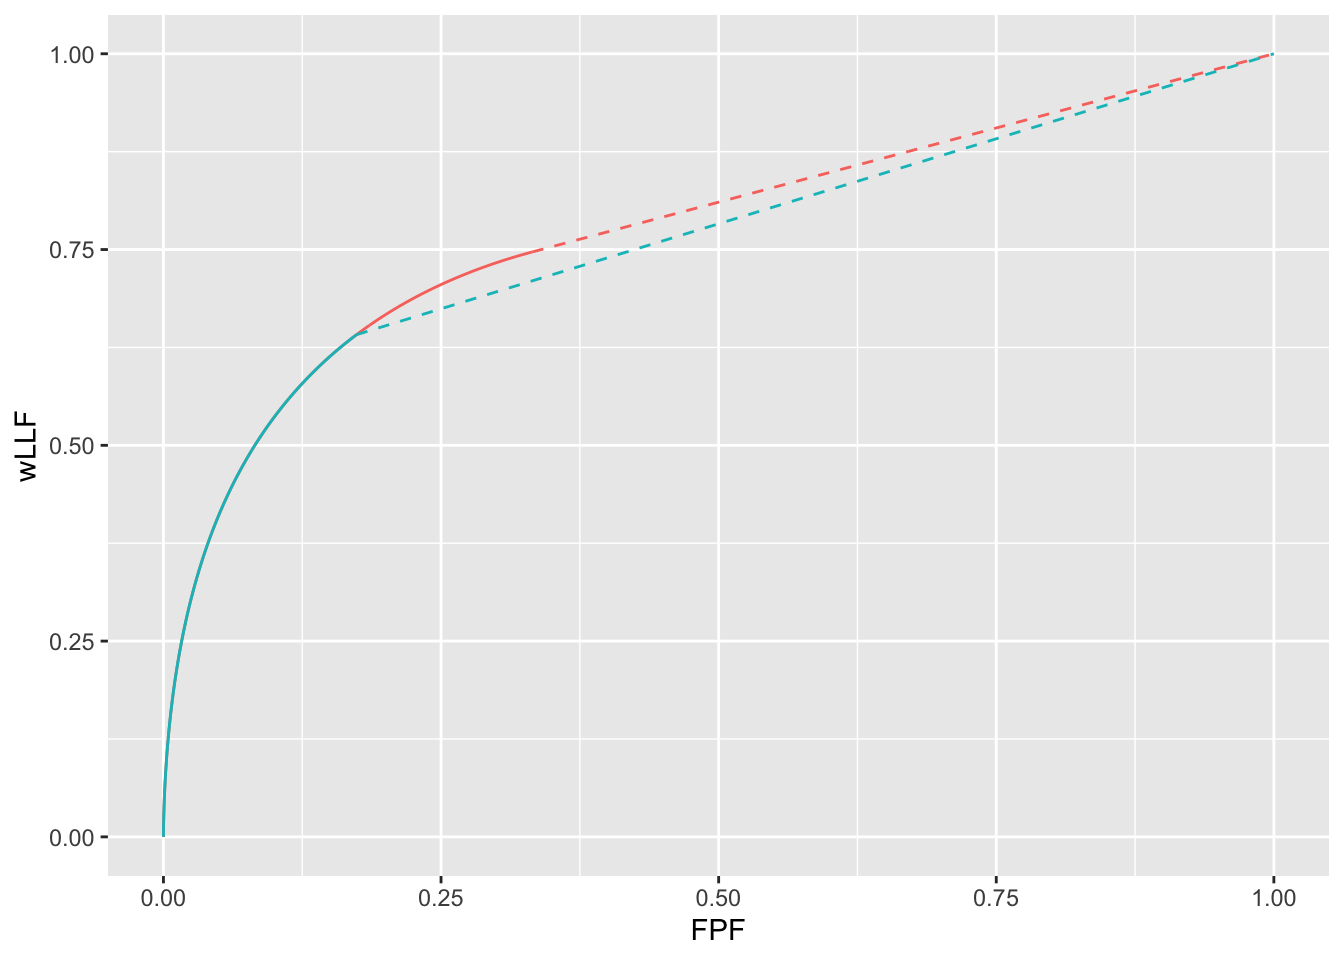 wAFROC curves for wAFROC-AUC and Youden-index based optimizations: both curves correspond to $\lambda = 1$, $\nu = 1$ and $\mu = 1.5$. The optimal reporting theshold $\zeta_1$ is determined by the selected FOM. The red curve corresponds to FOM = wAFROC-AUC and the blue curve corresponds to FOM = Youden-index. The stricter reporting threshold found by the Youden-index based method sacrifices a considerable amount of area under the wAFROC. The two wAFROC-AUCs are 0.777 and 0.760, respectively.